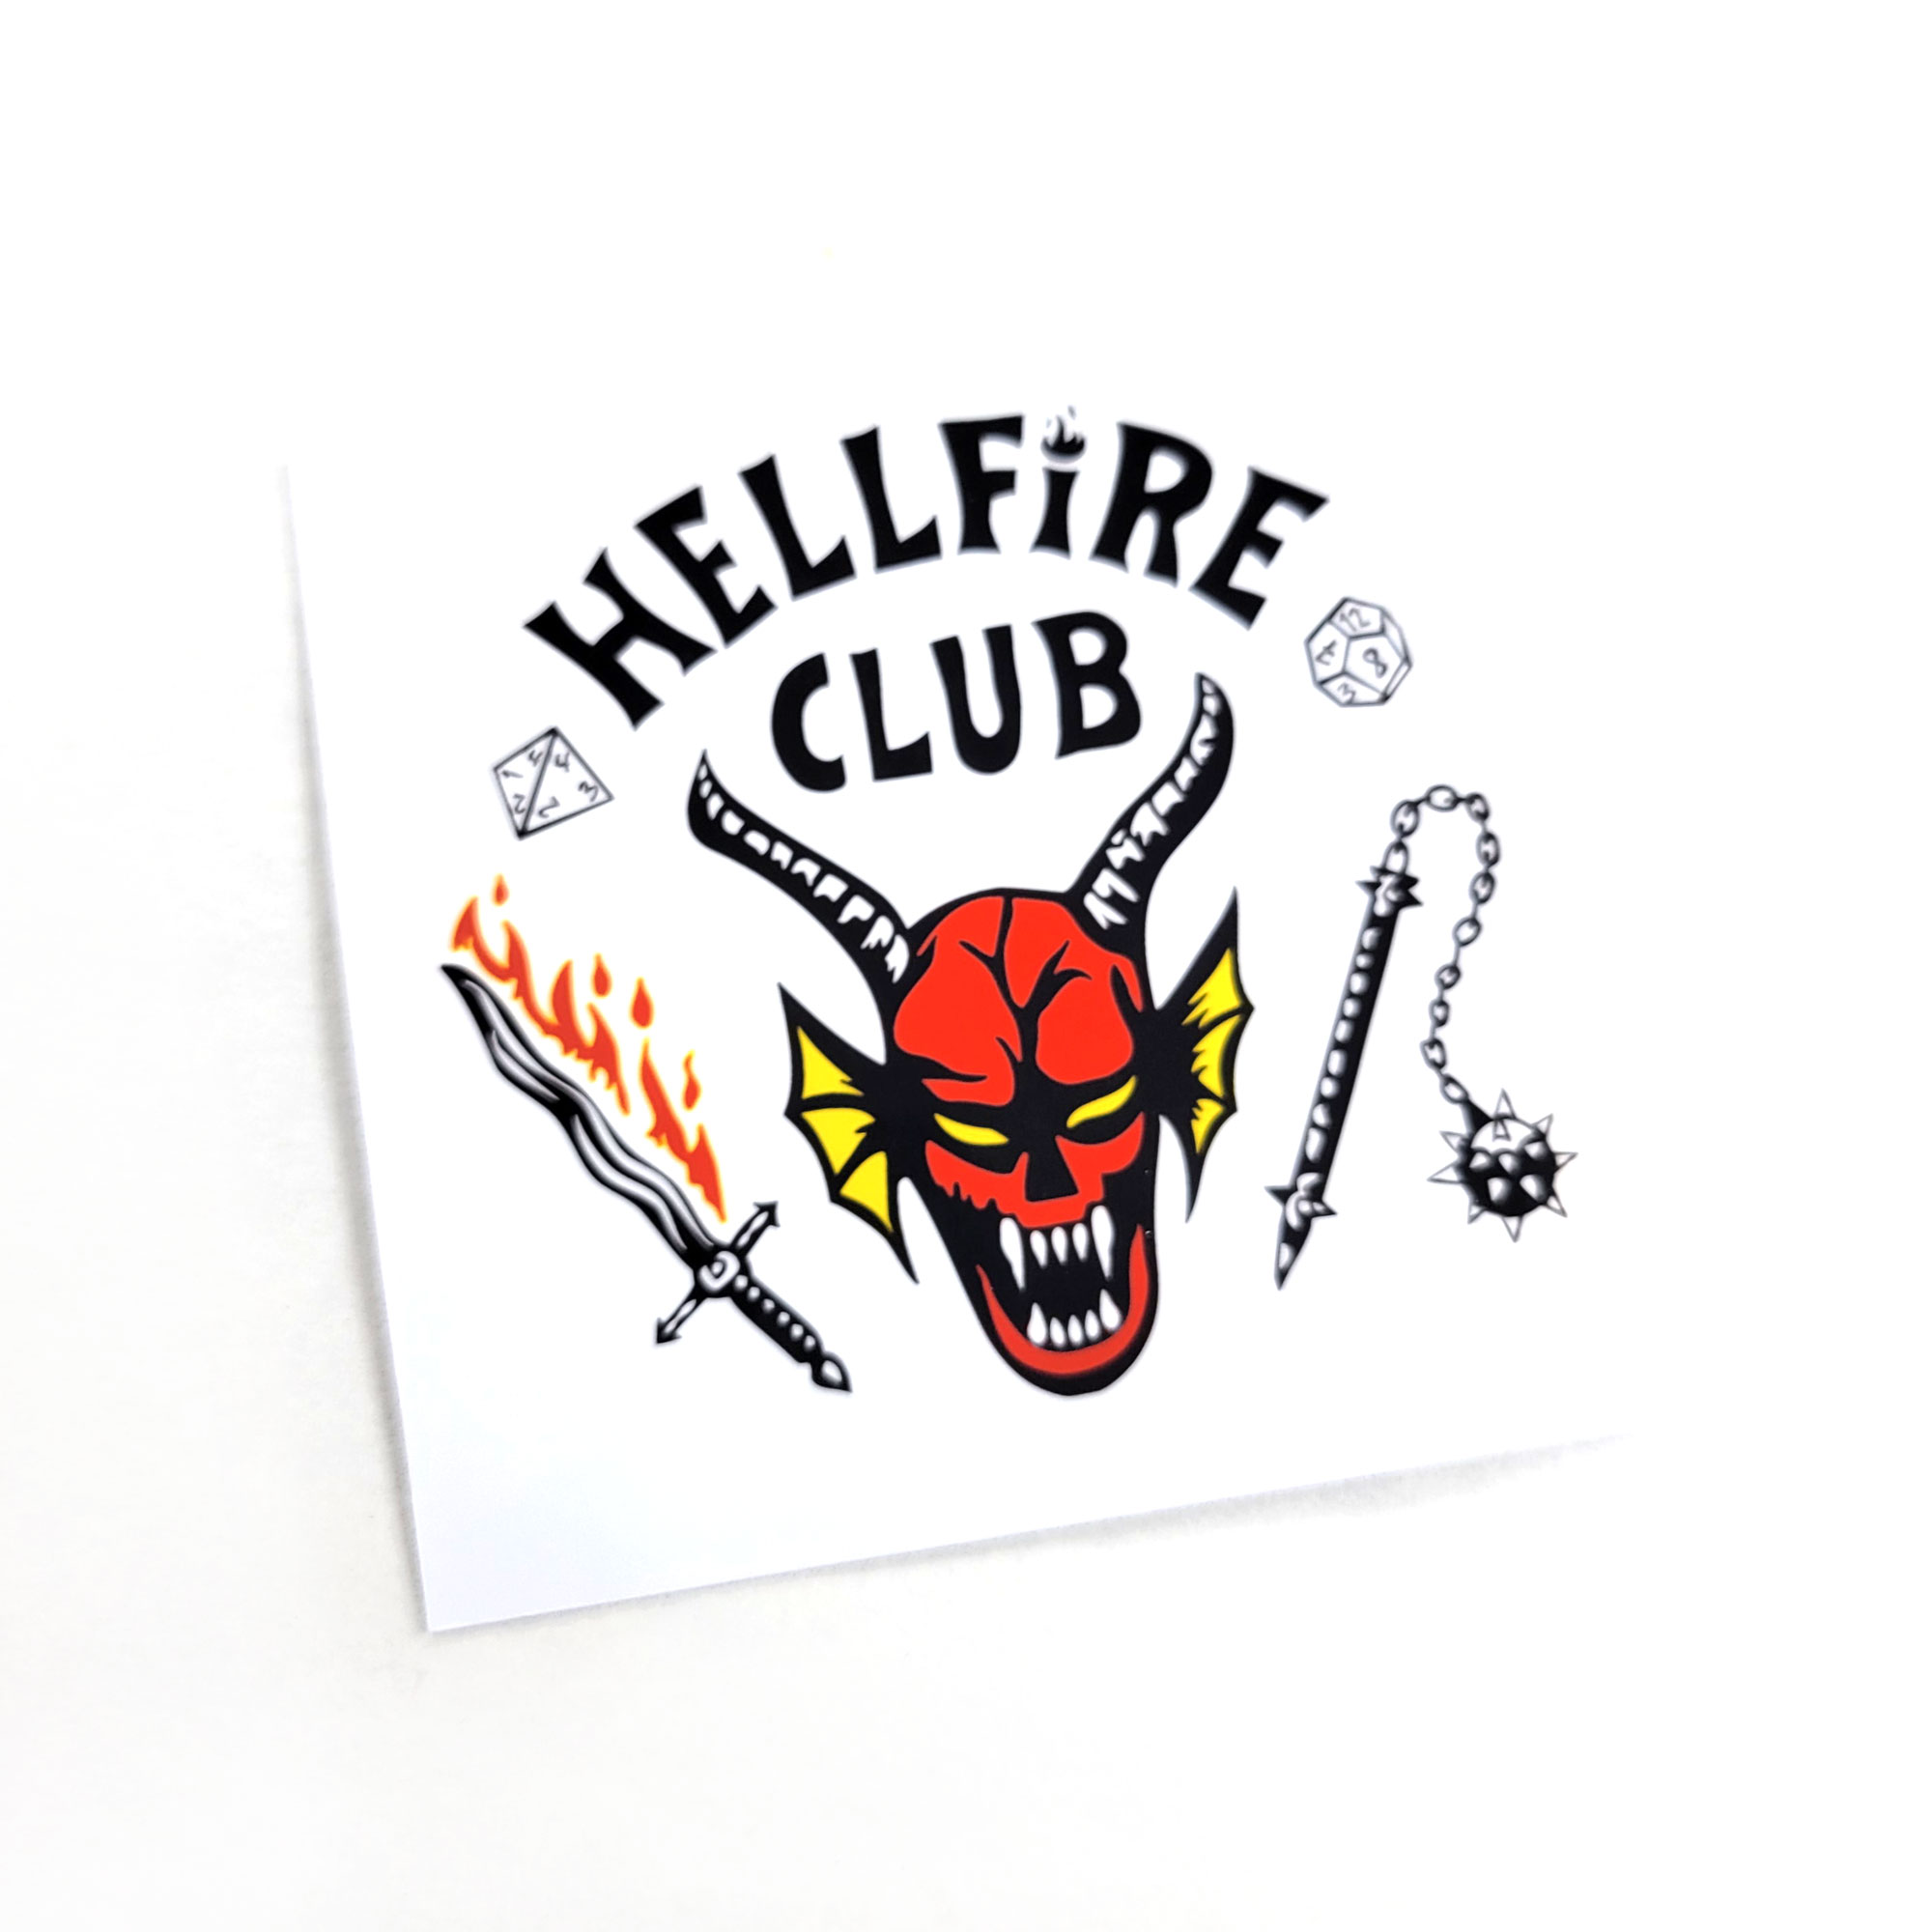 D&D Club Stickers by Wilde Designs